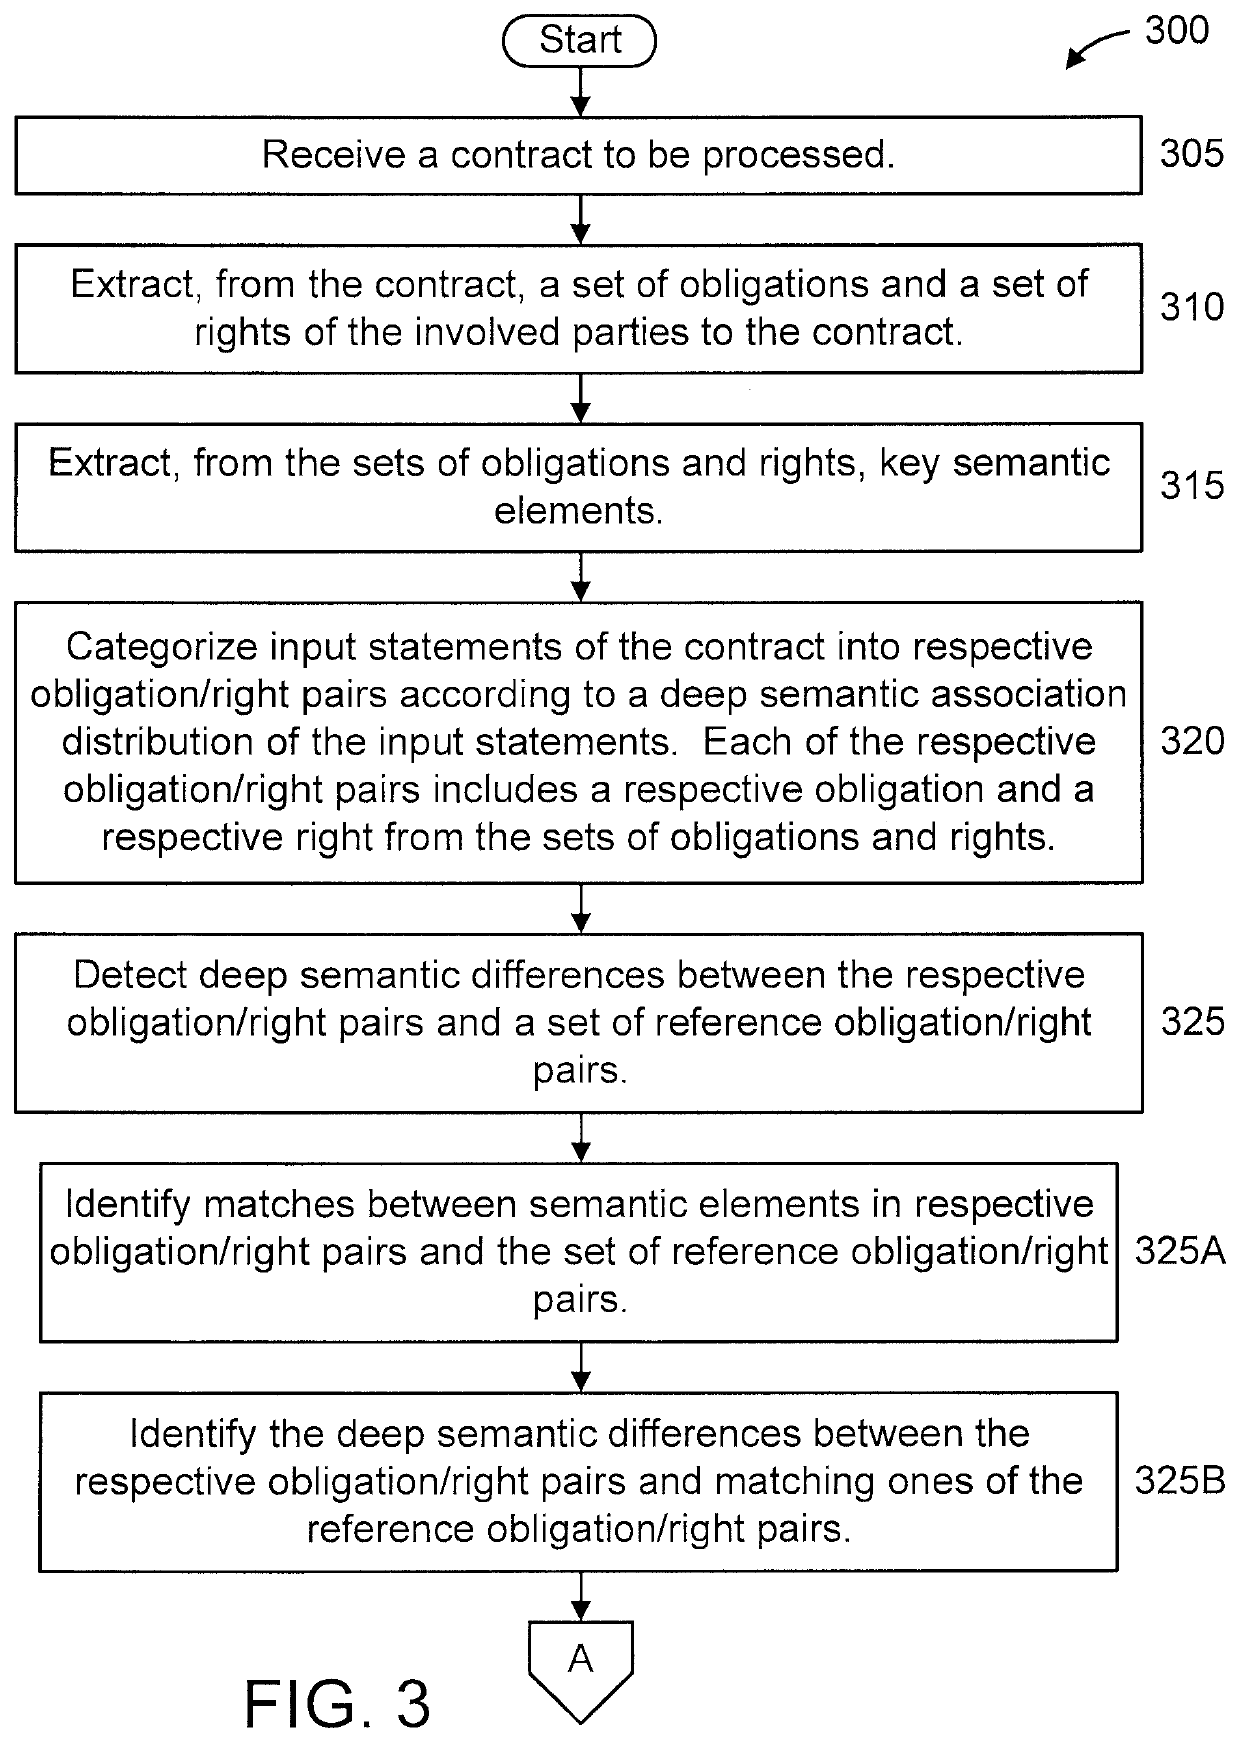 Role-oriented risk checking in contract review based on deep semantic association analysis